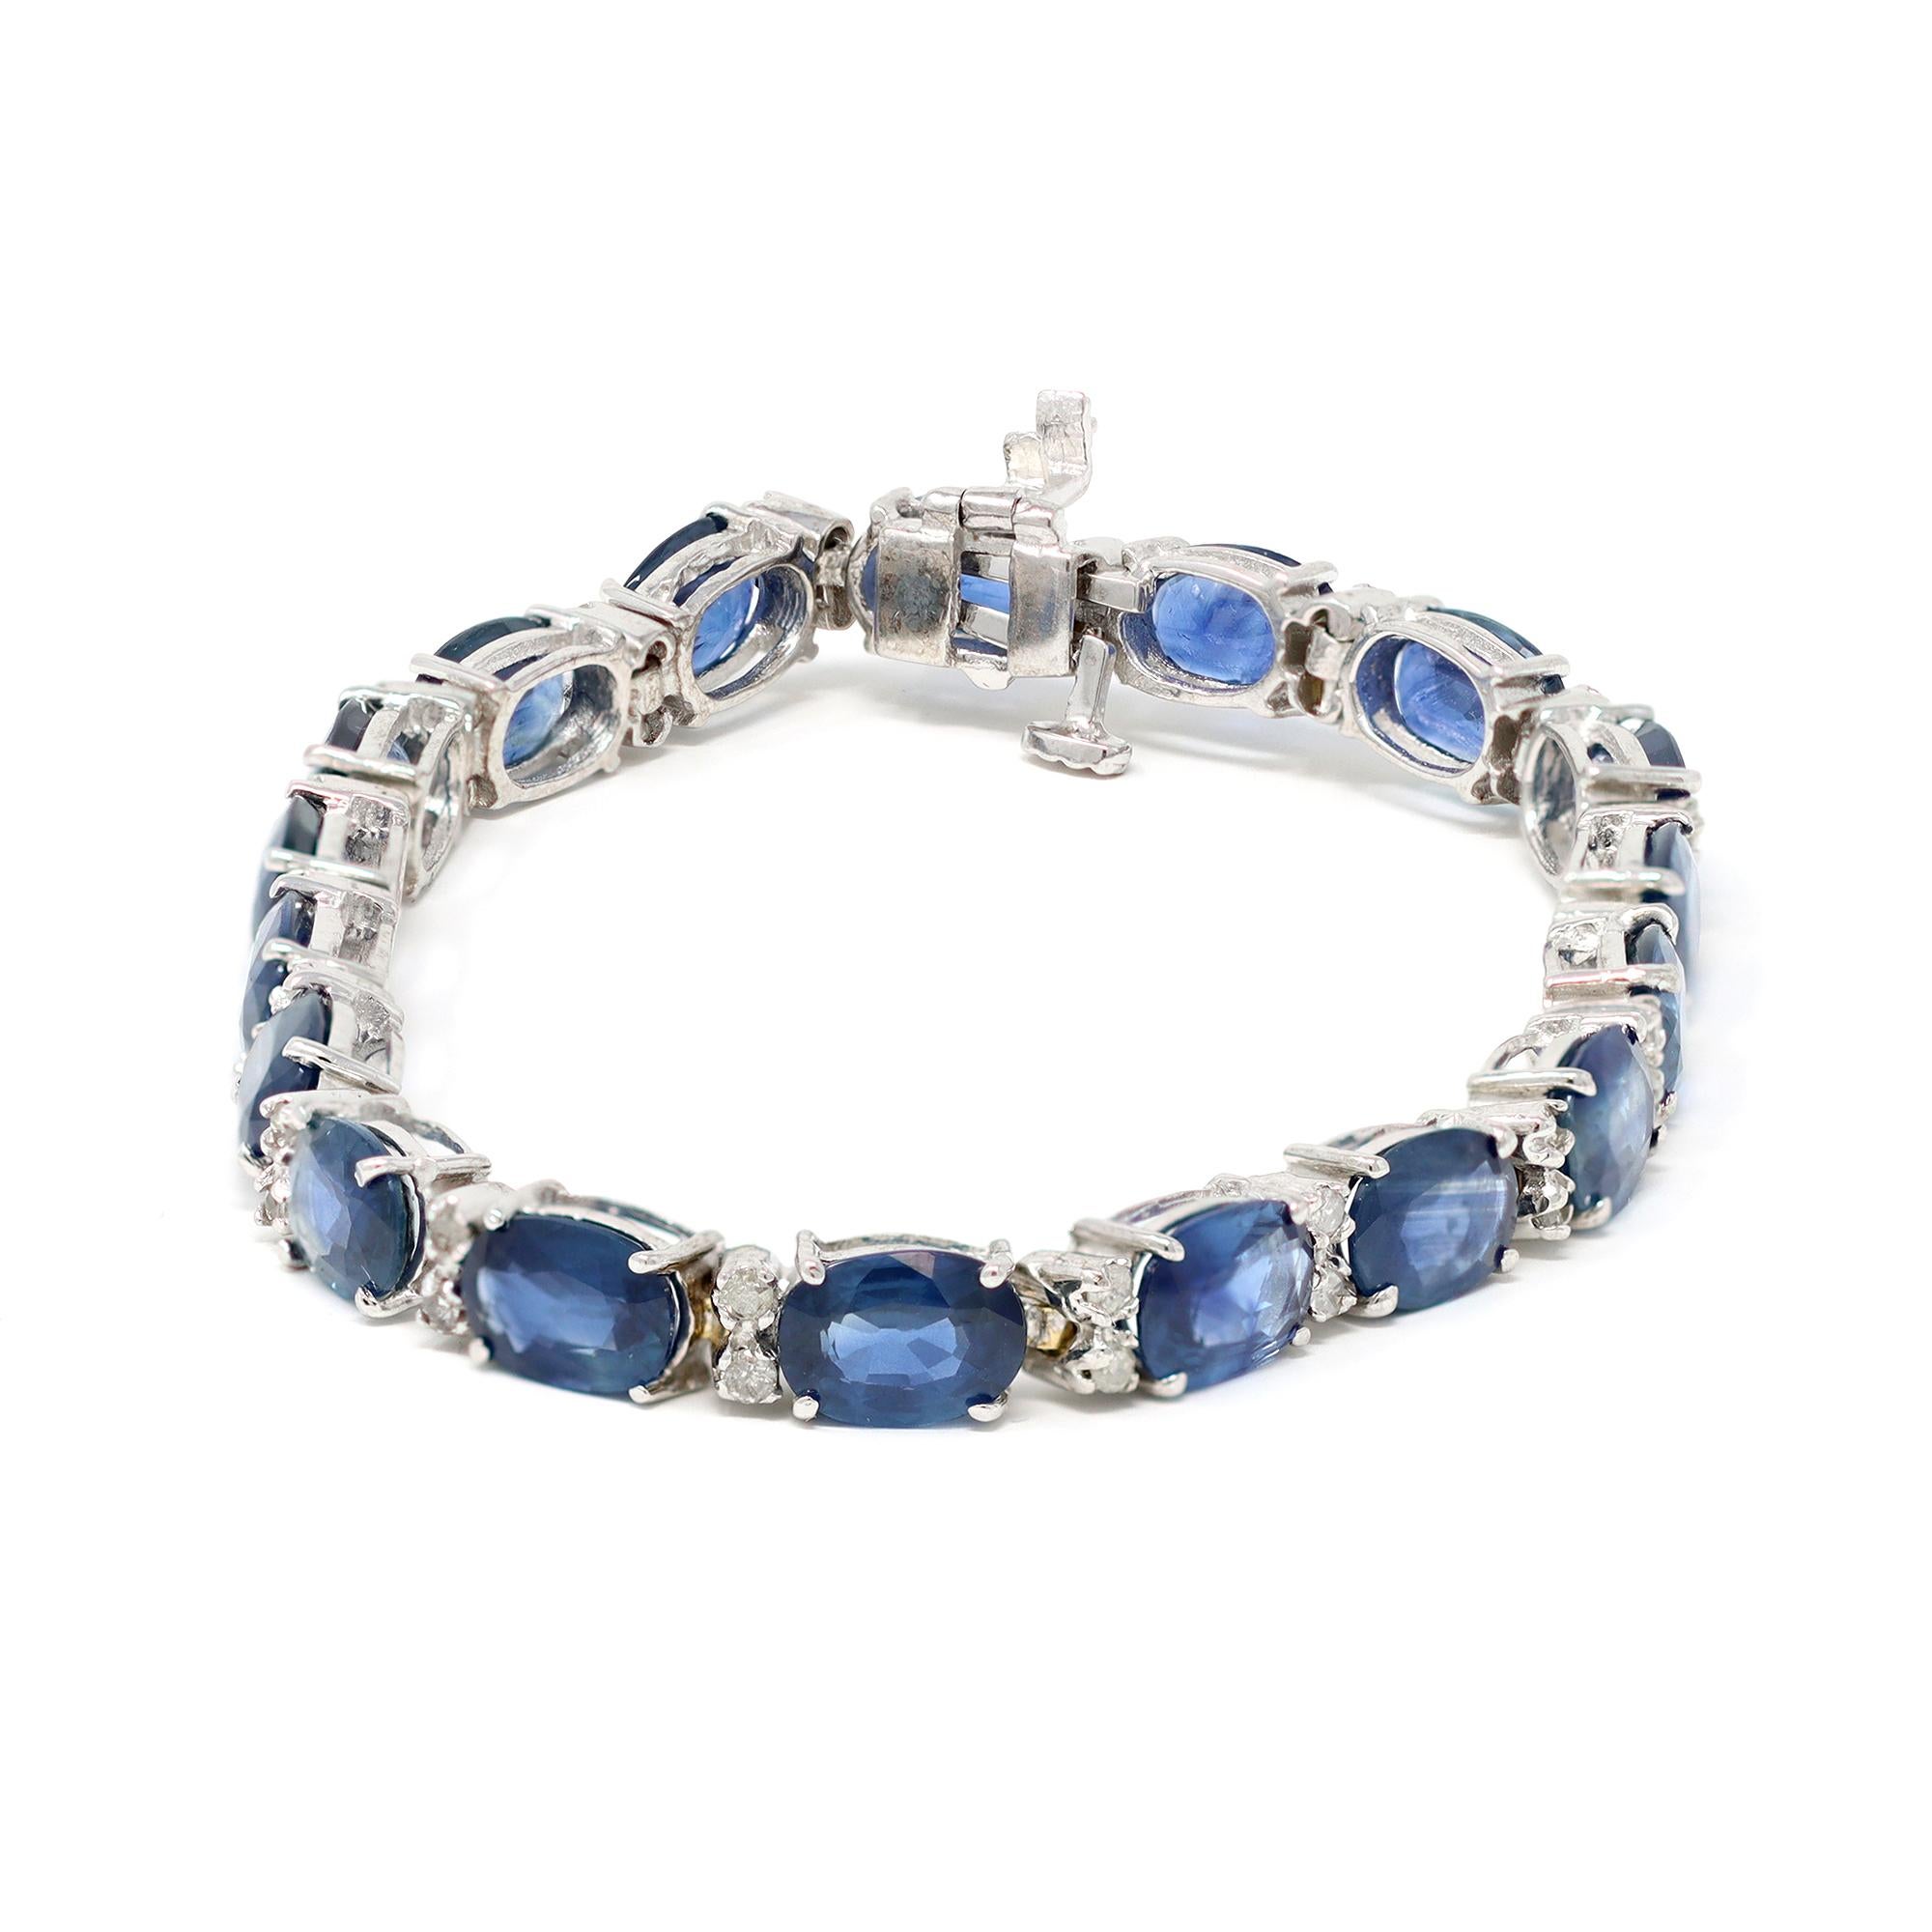 A tennis style bracelet featuring a line of calibrated blue sapphires alternated with accent diamonds. The sapphires are oval shape and well matched in color, displaying a medium deep blue. The estimated weight of the sapphires is 9 carats. The